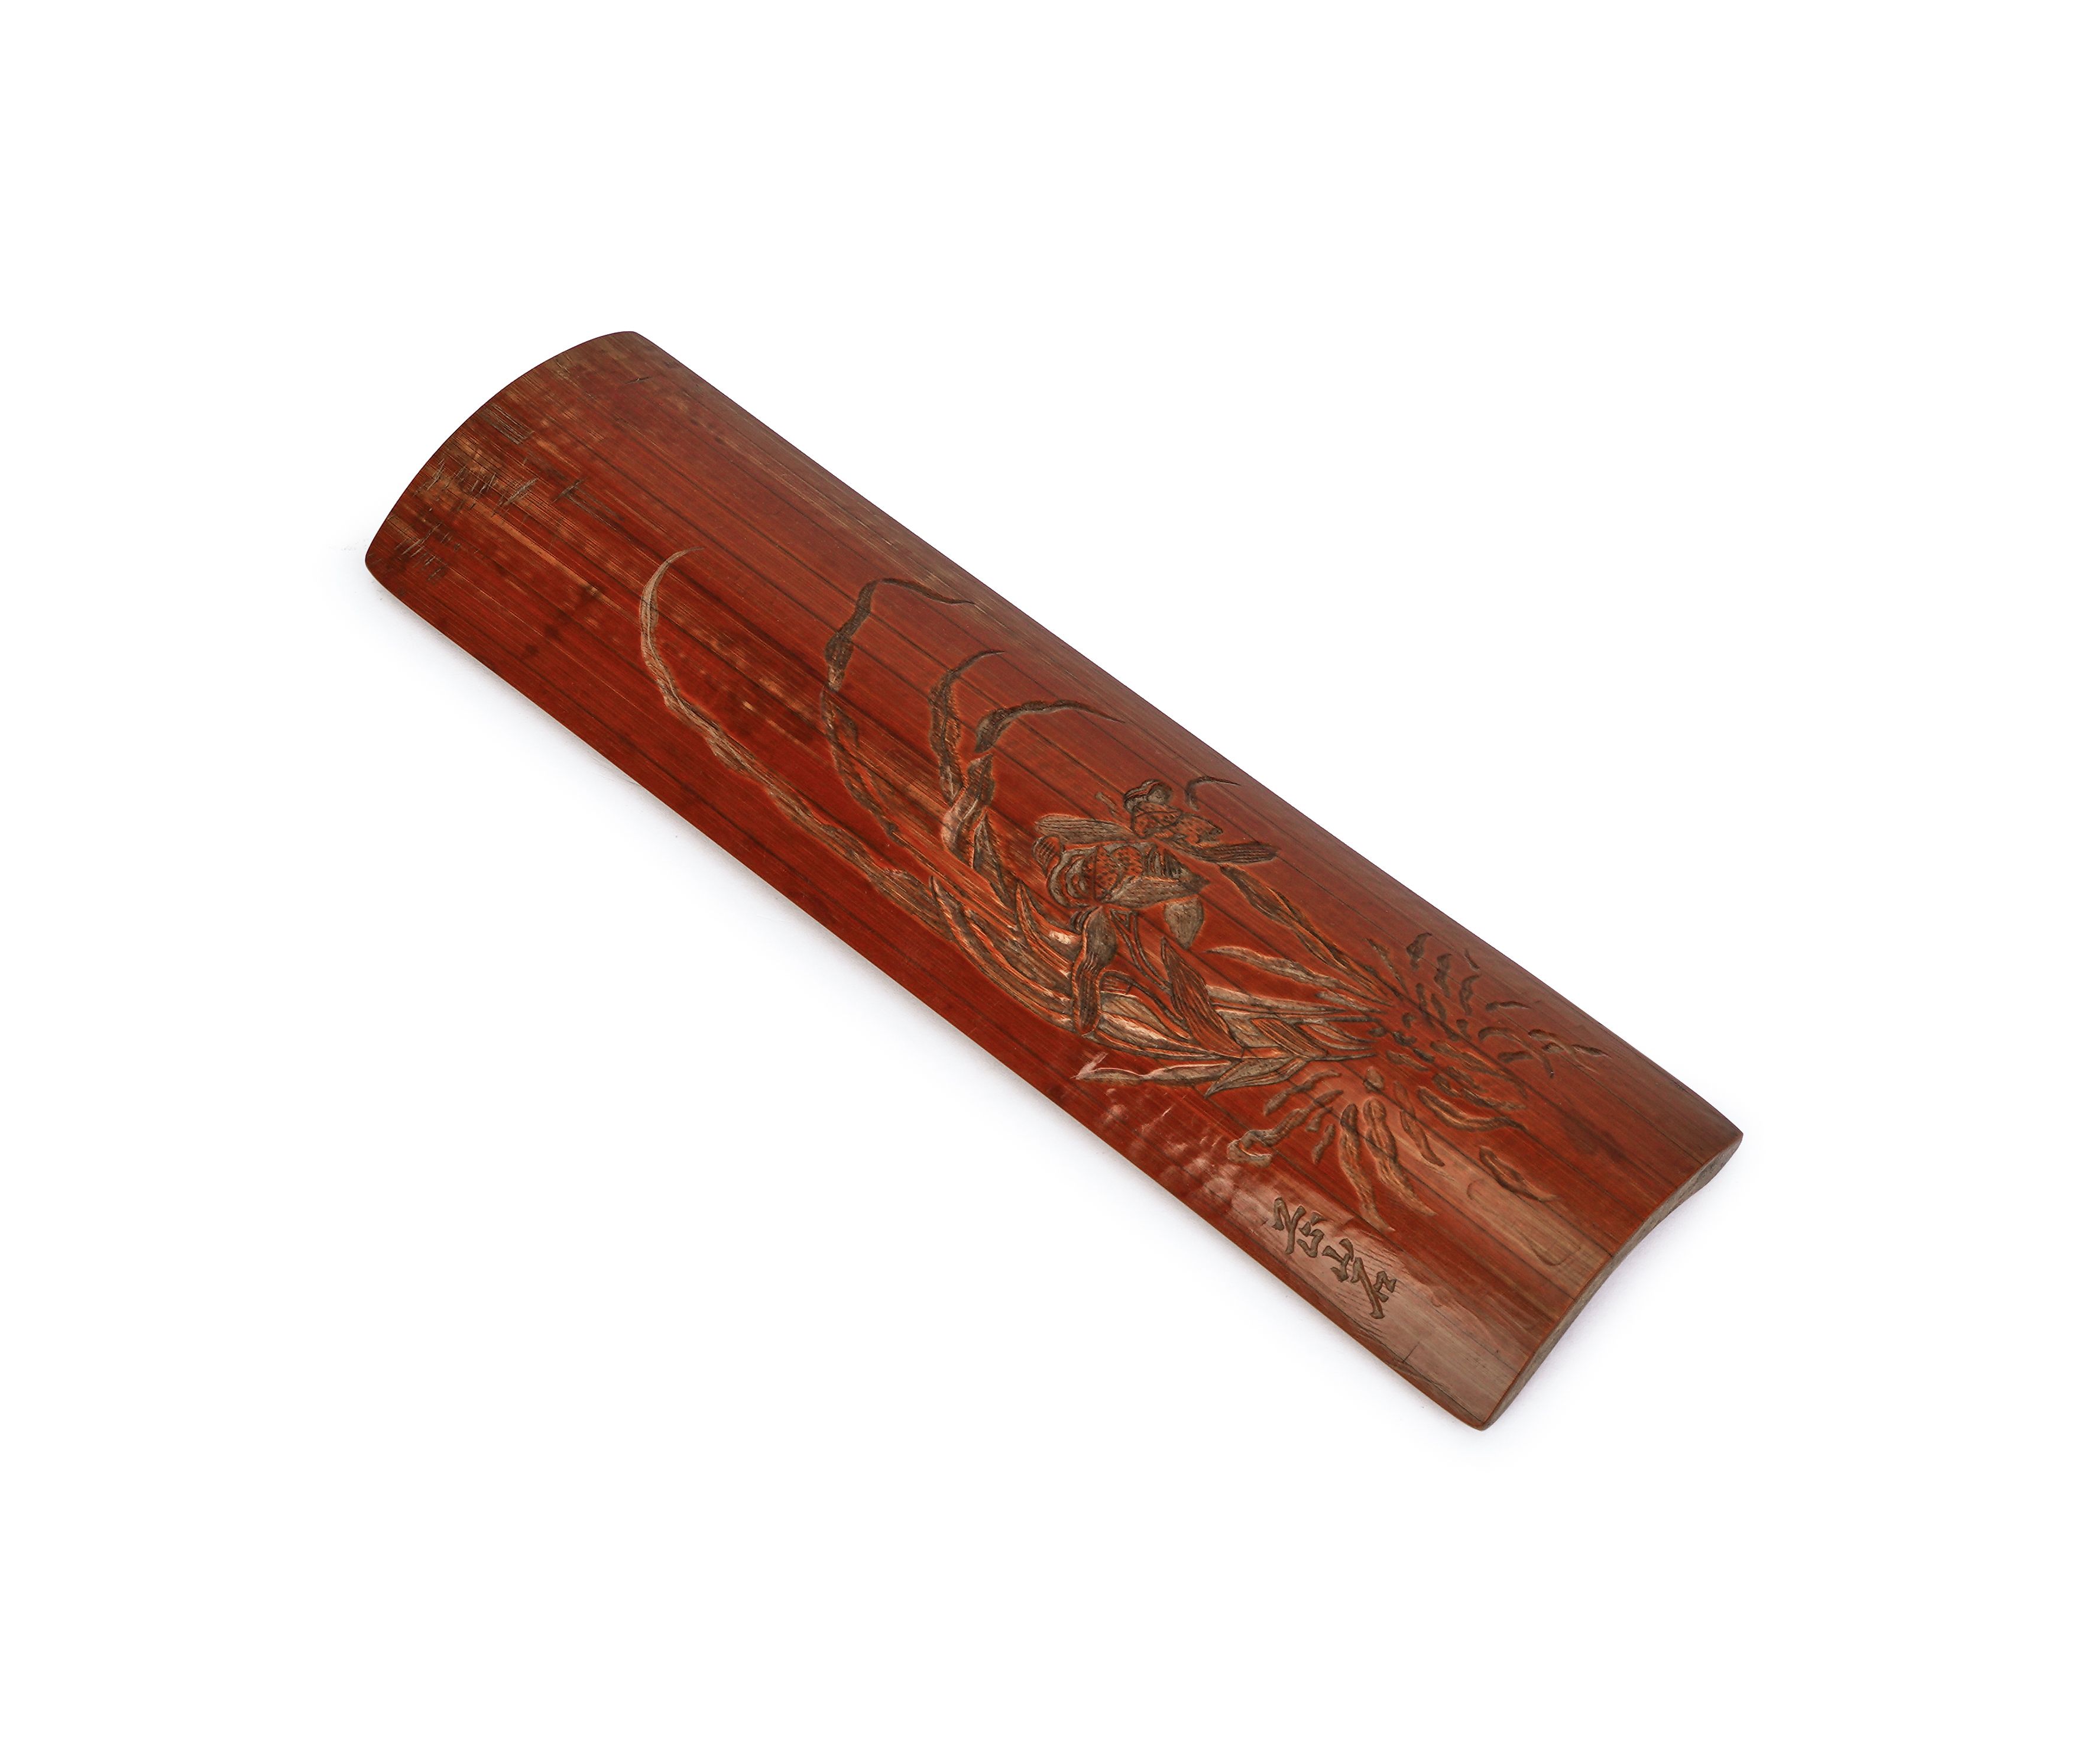 A RARE BAMBOO CARVING ARM REST, BY ZHOU ZHIYAN, QING DYNASTY (1644-1911) - Image 5 of 10